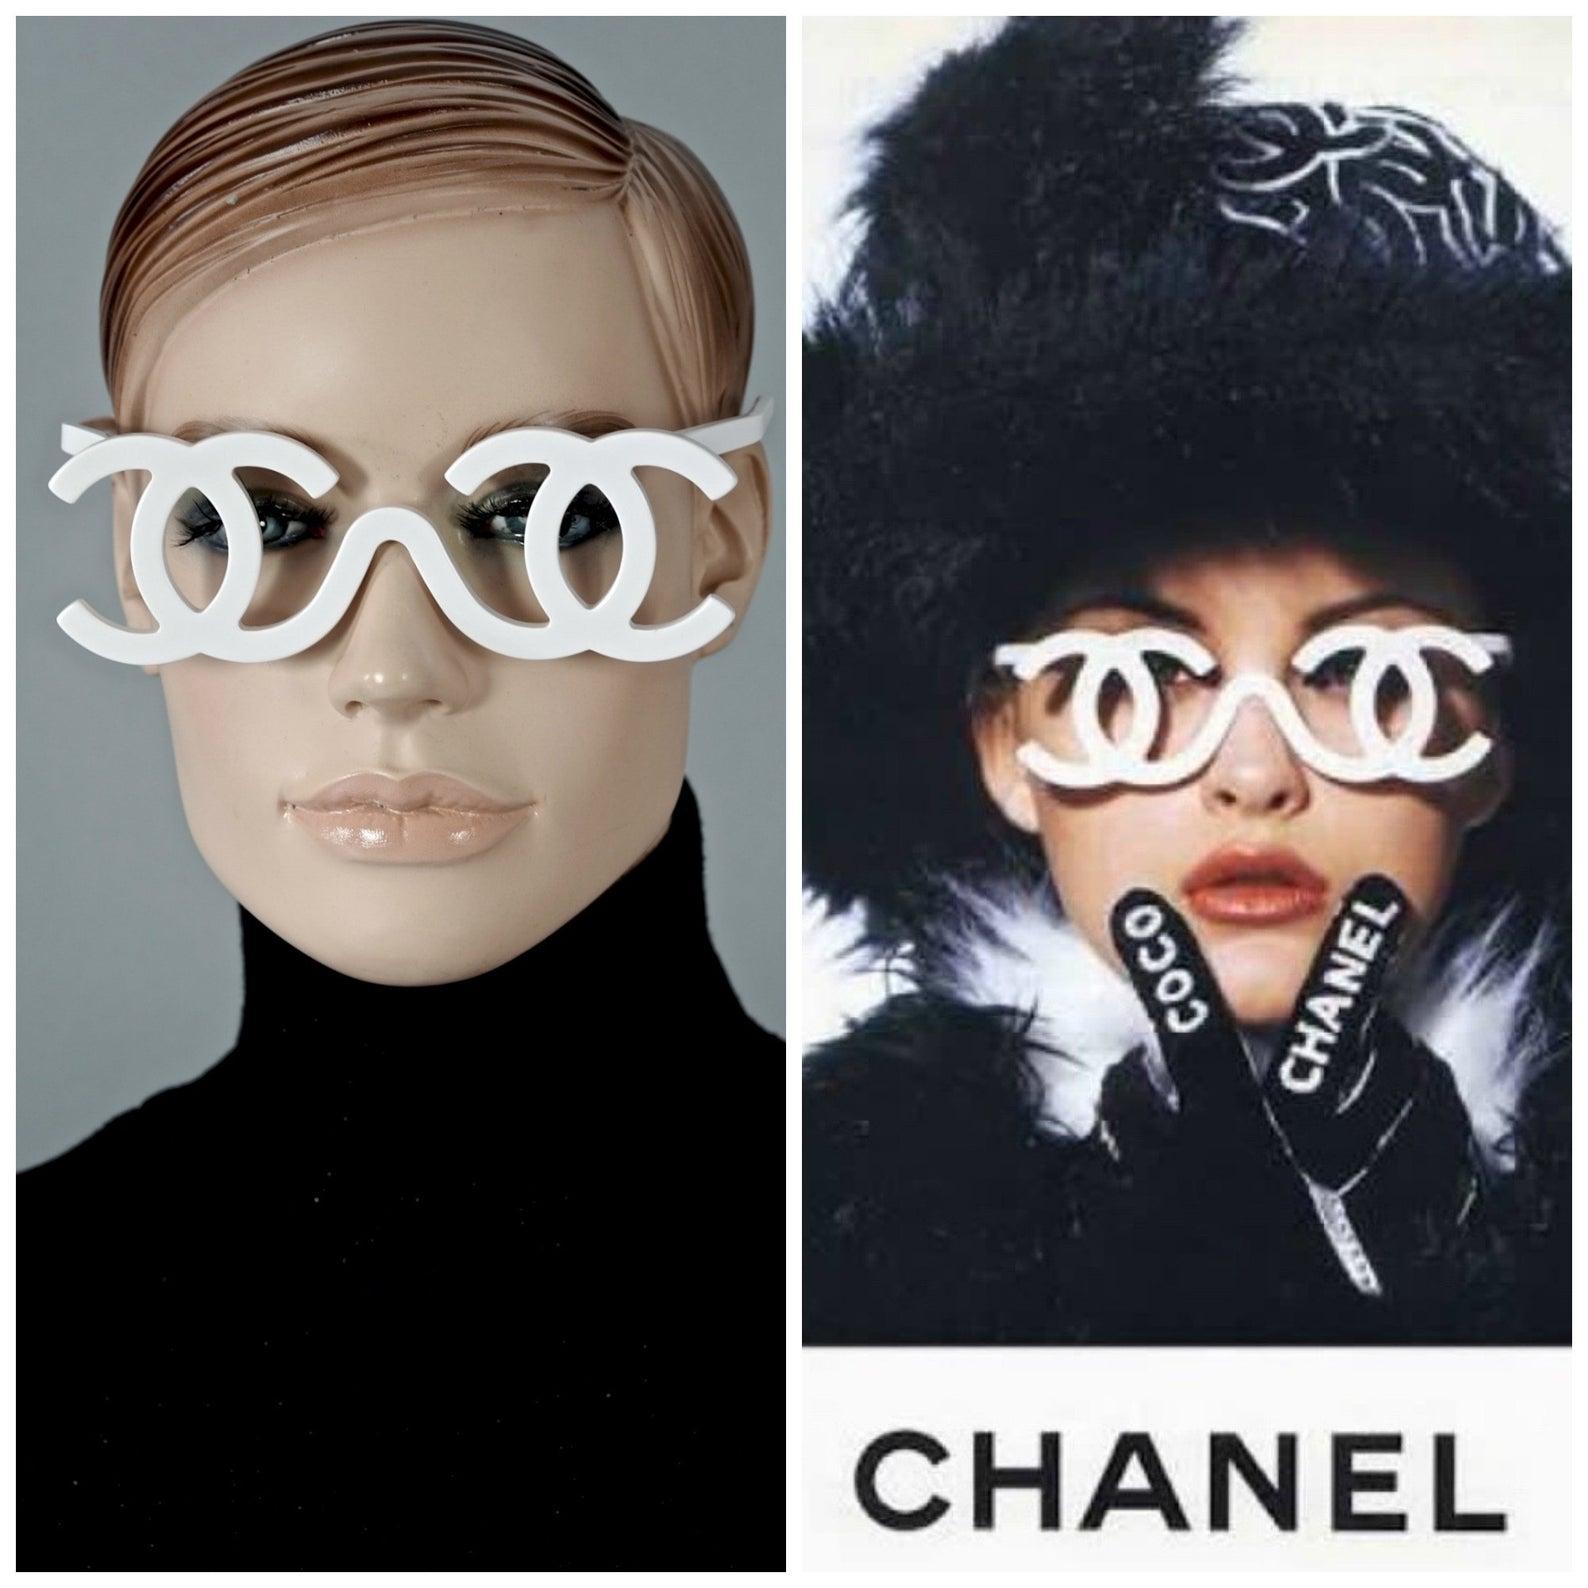 Measurements:
Height: 2 inches (5 cm)
Frame Width: 5.55 inches (14.1 cm)
Arm:  5.19 inches (13.2 cm)

Vintage Chanel Runway Fall / Winter 1994 sunglasses.

Features:
- 100% Authentic Vintage CHANEL. 
- White openwork CC logo frame with no lenses.
-